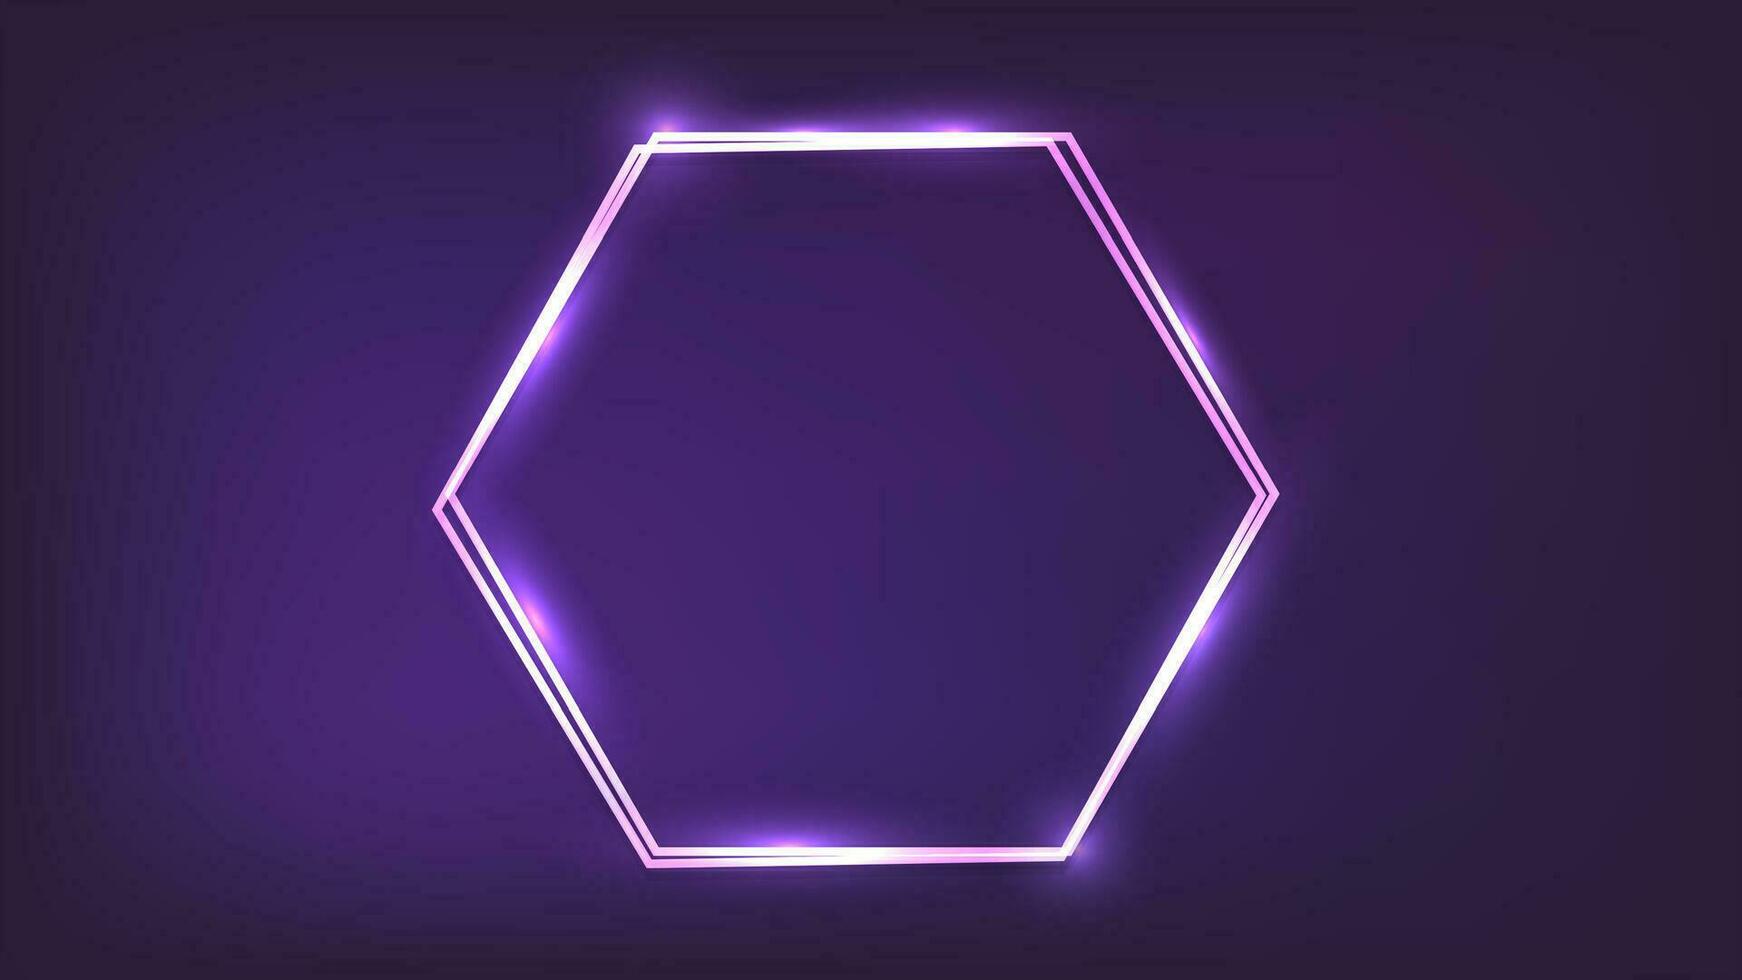 Neon double hexagon frame with shining effects vector